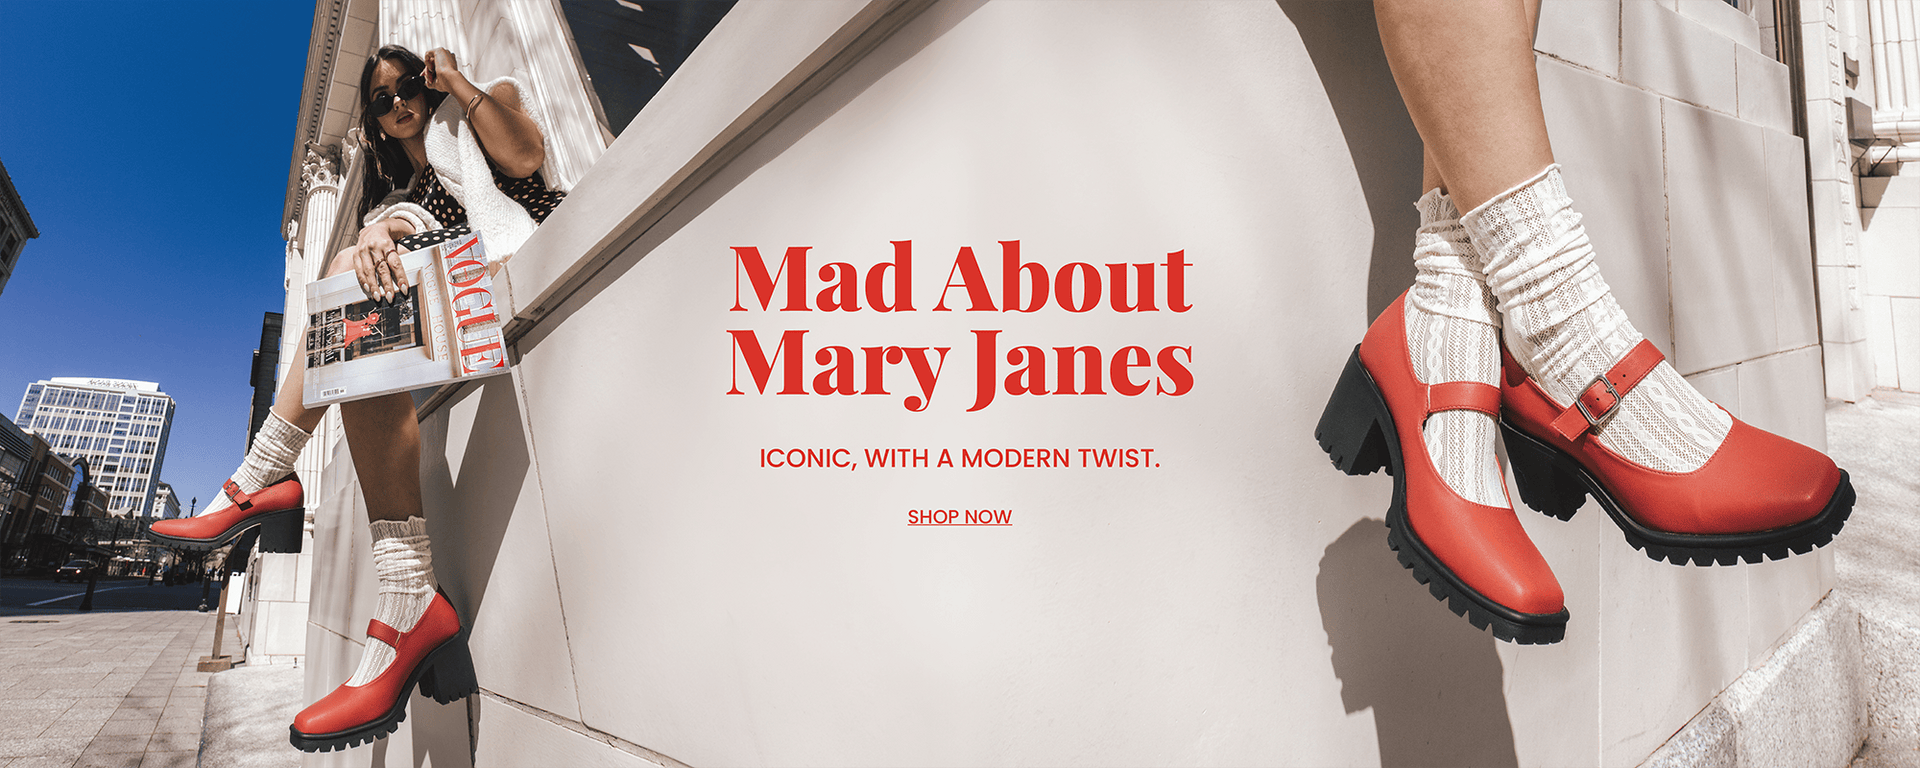 "Mad about Mary Janes" header text in red with "Iconic, with a modern twist." sub text. A model in a polka dot dress holding a fashion magazine with her red  Mary Jane shoes in focus. "Shop Now" call to action.